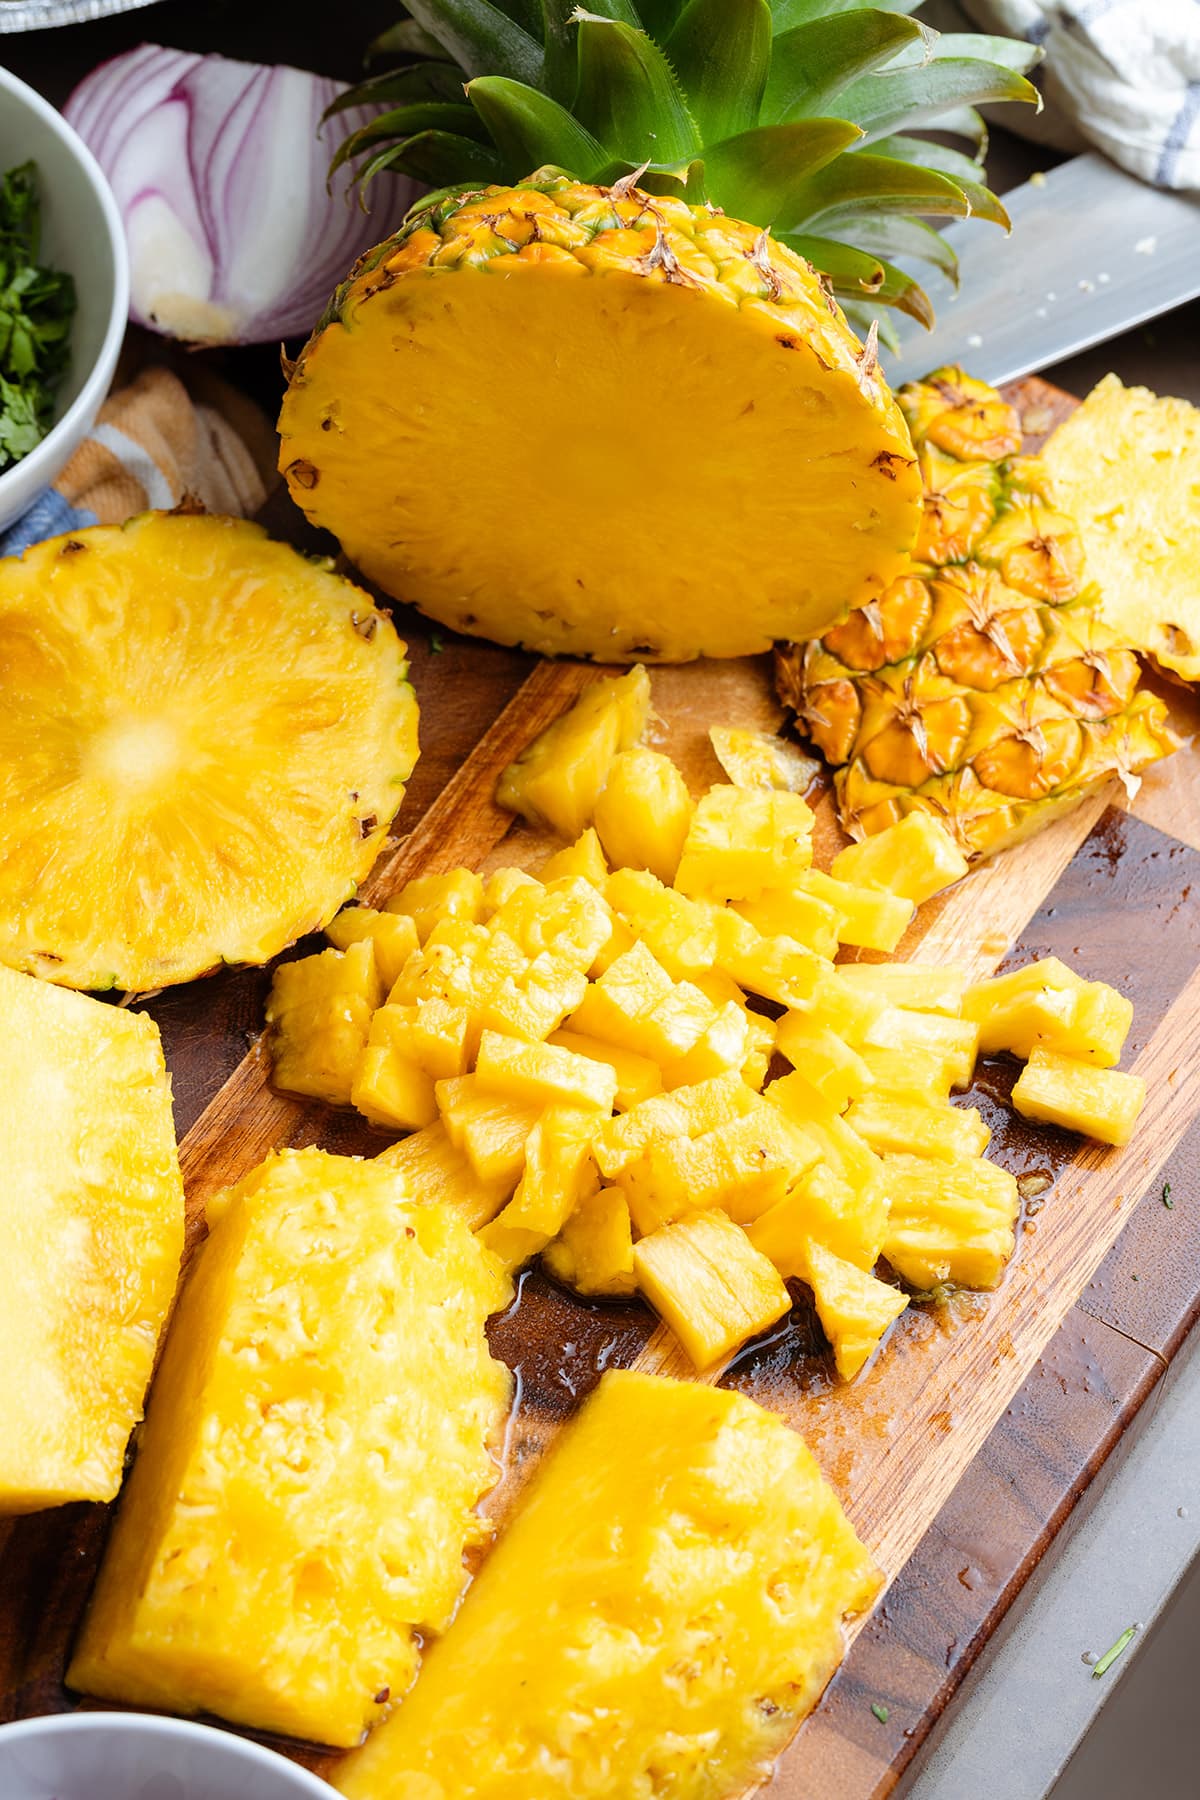 Sliced and diced pineapple on a wooden cutting board in the process of being diced.